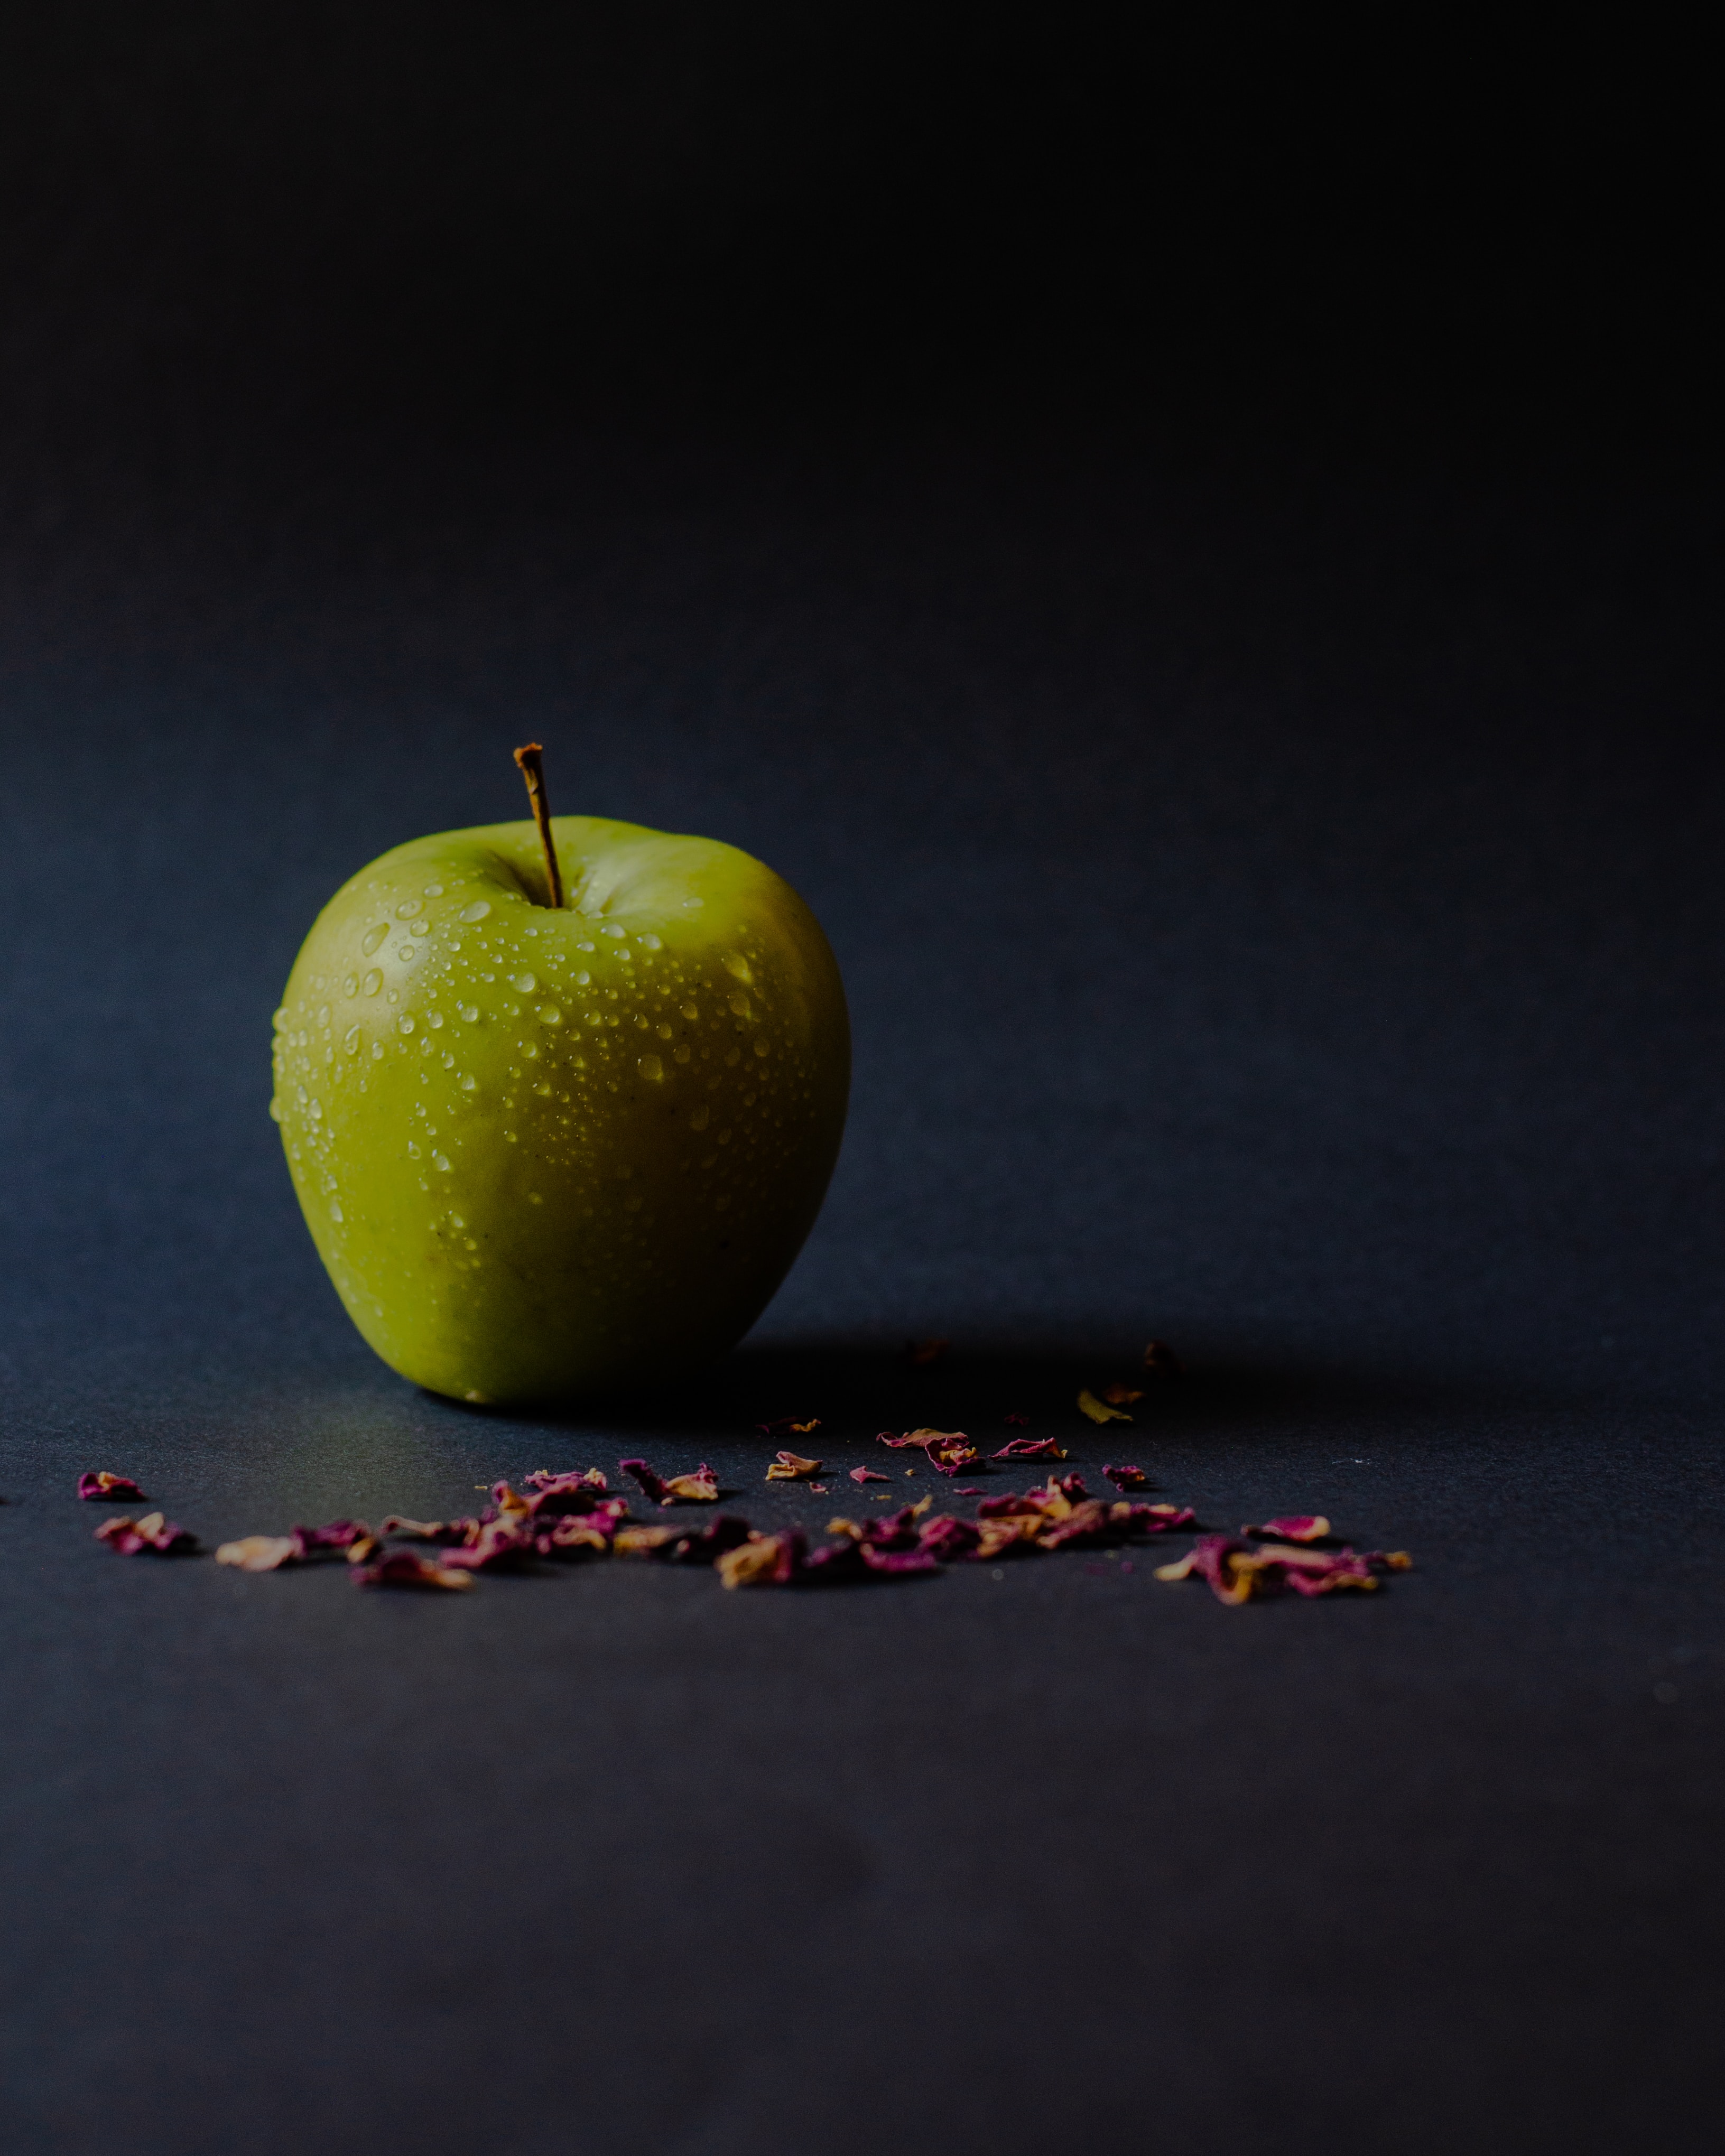 127382 Screensavers and Wallpapers Apple for phone. Download food, apple, green, petals, wet, ripe pictures for free